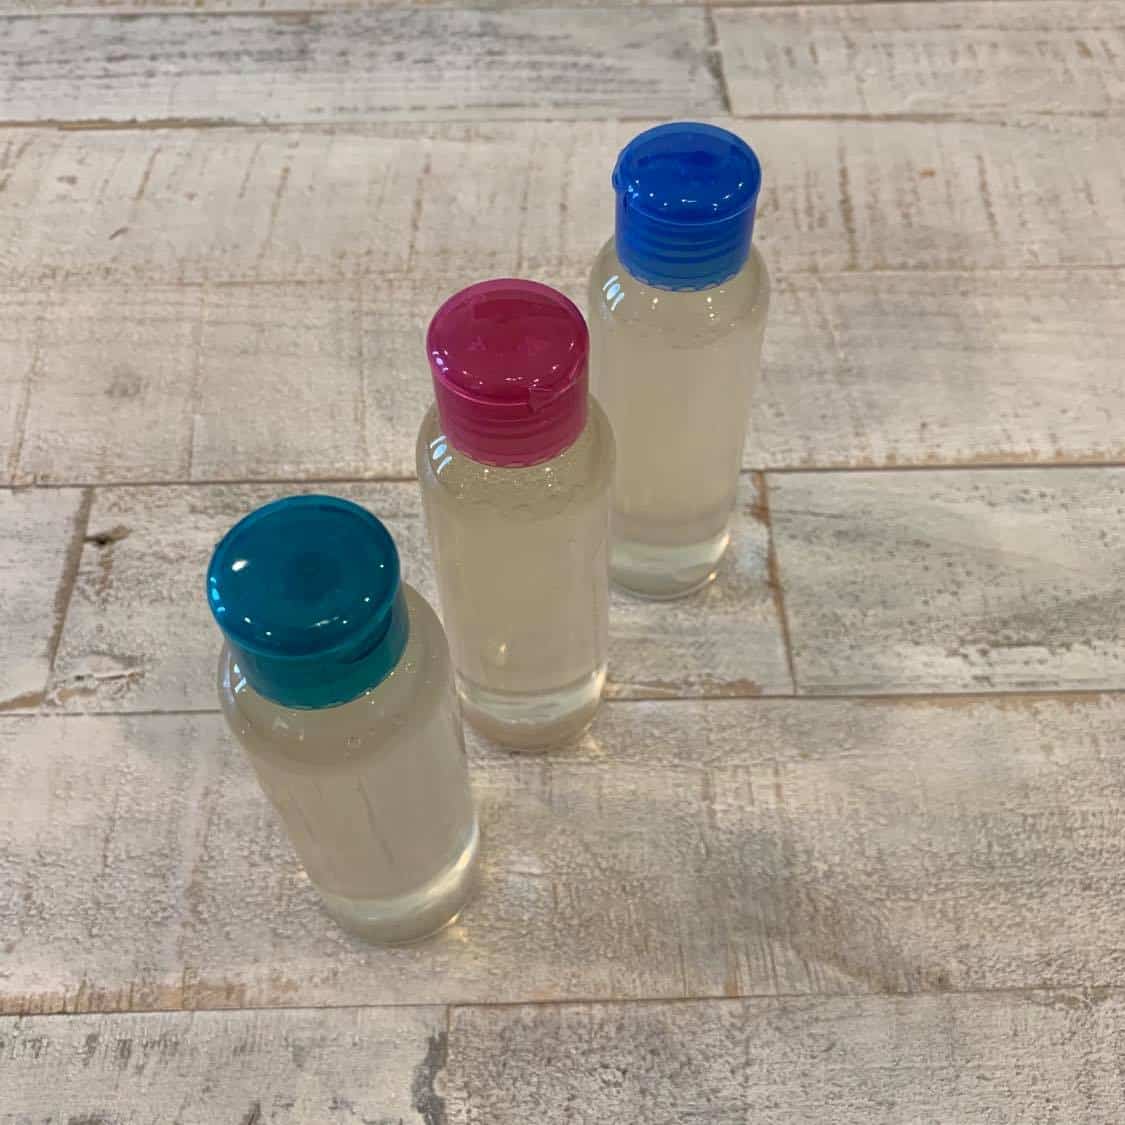 Super Quick and Easy Homemade Hand Sanitizer